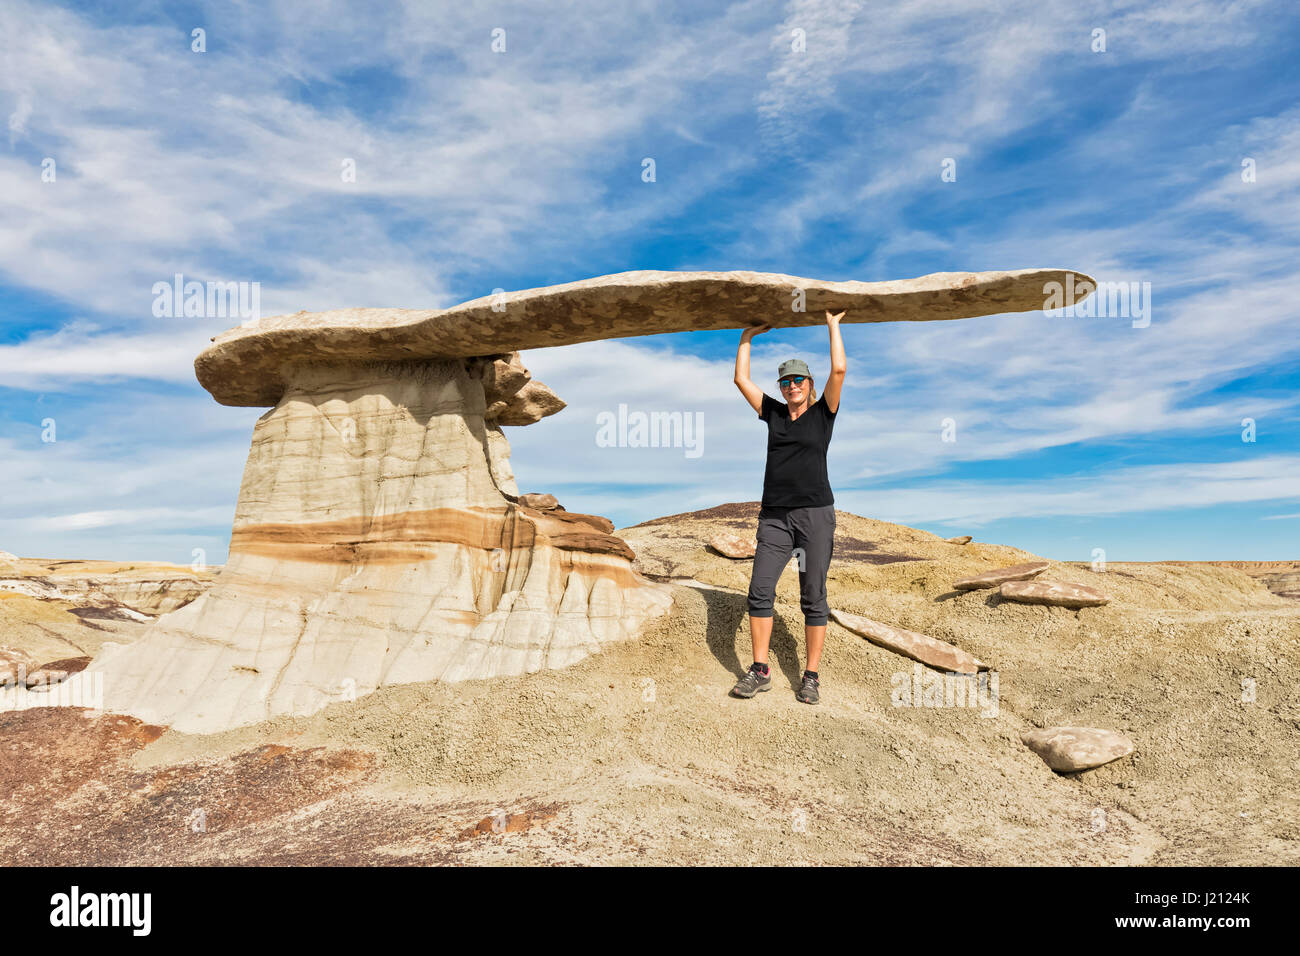 USA, New Mexico, Ah-shi-sle-pah Wash, tourist at King of Wings rock formation Stock Photo